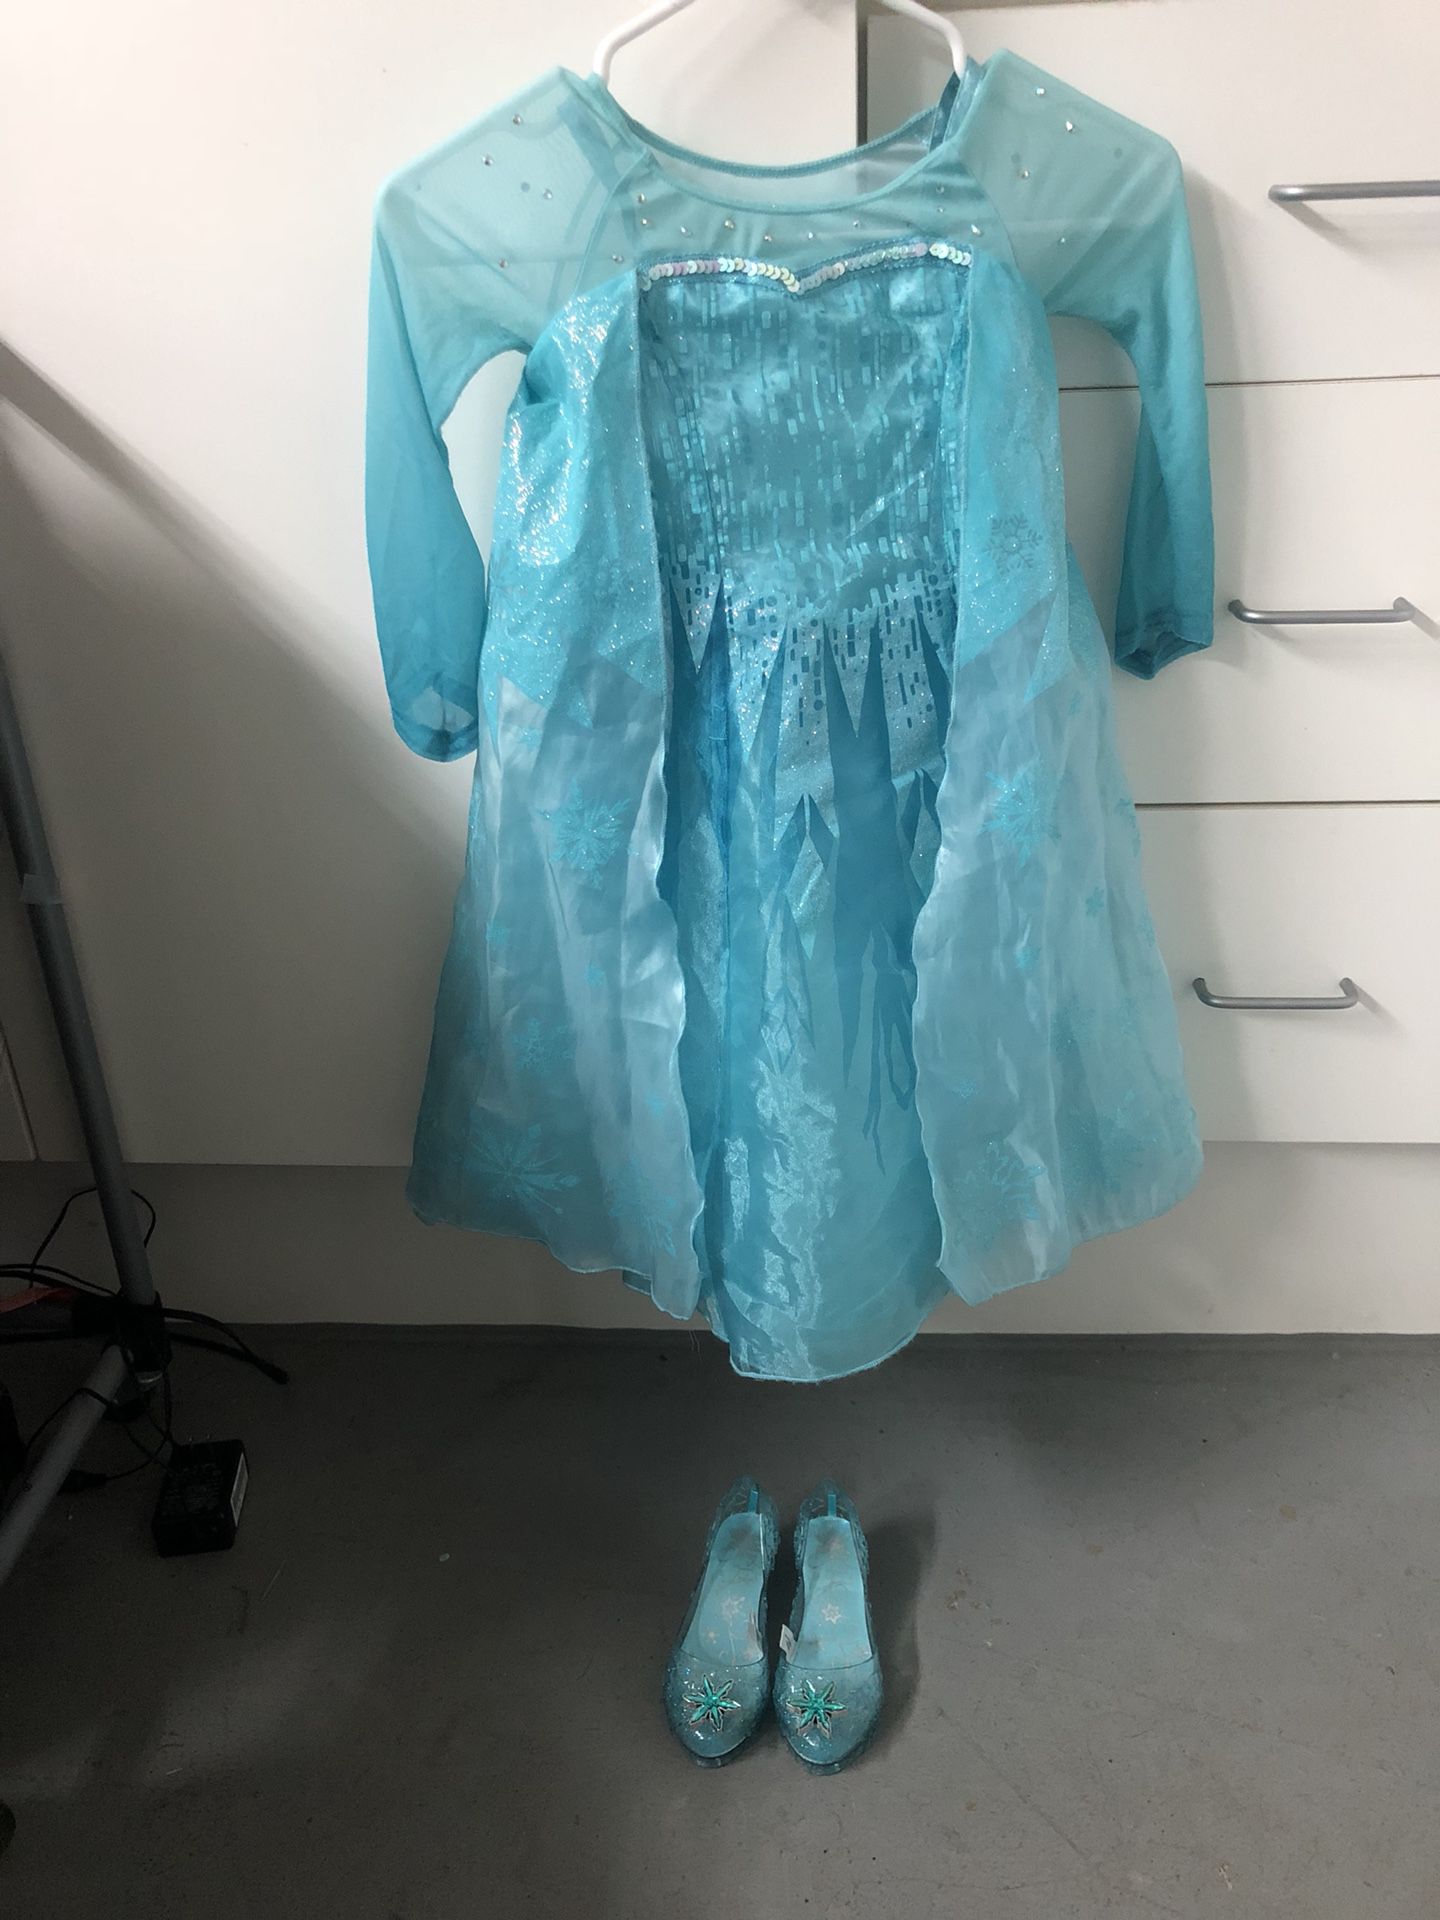 Disney Elsa Frozen Dress with Light up Shoes, Tinkerbell with light up wings & Bat girl Costume